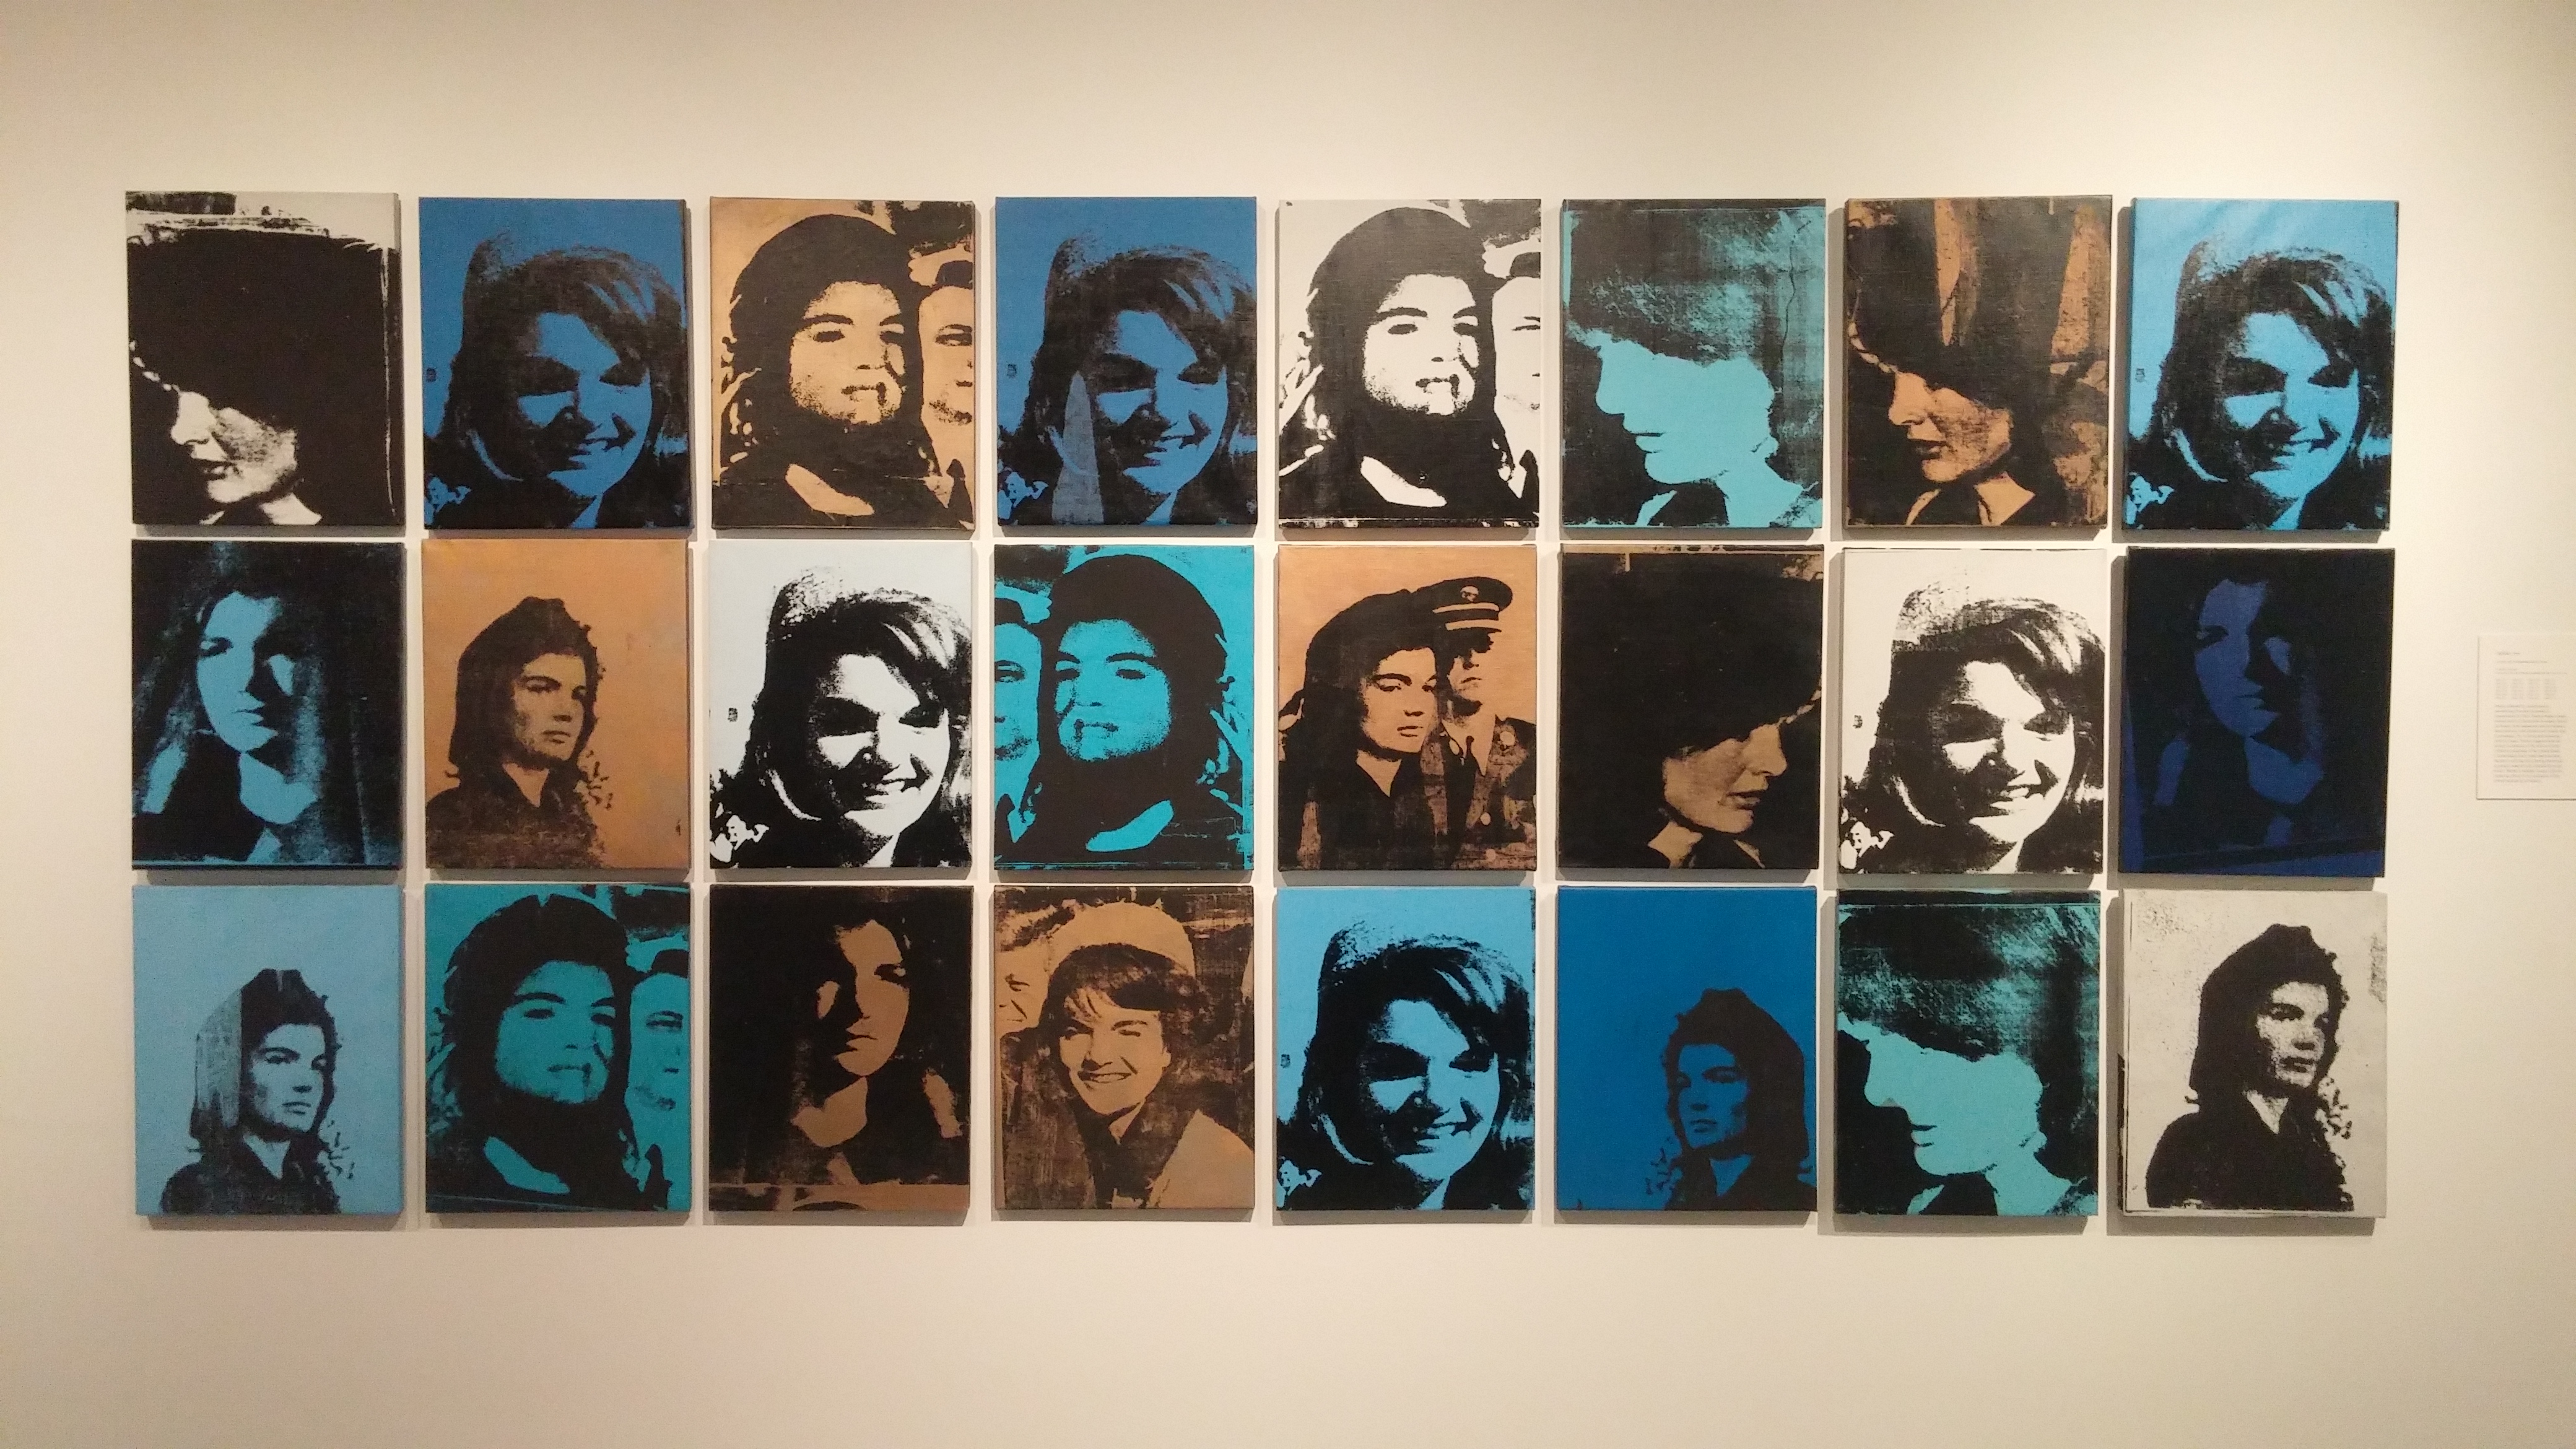 Photo 4 from Warhol